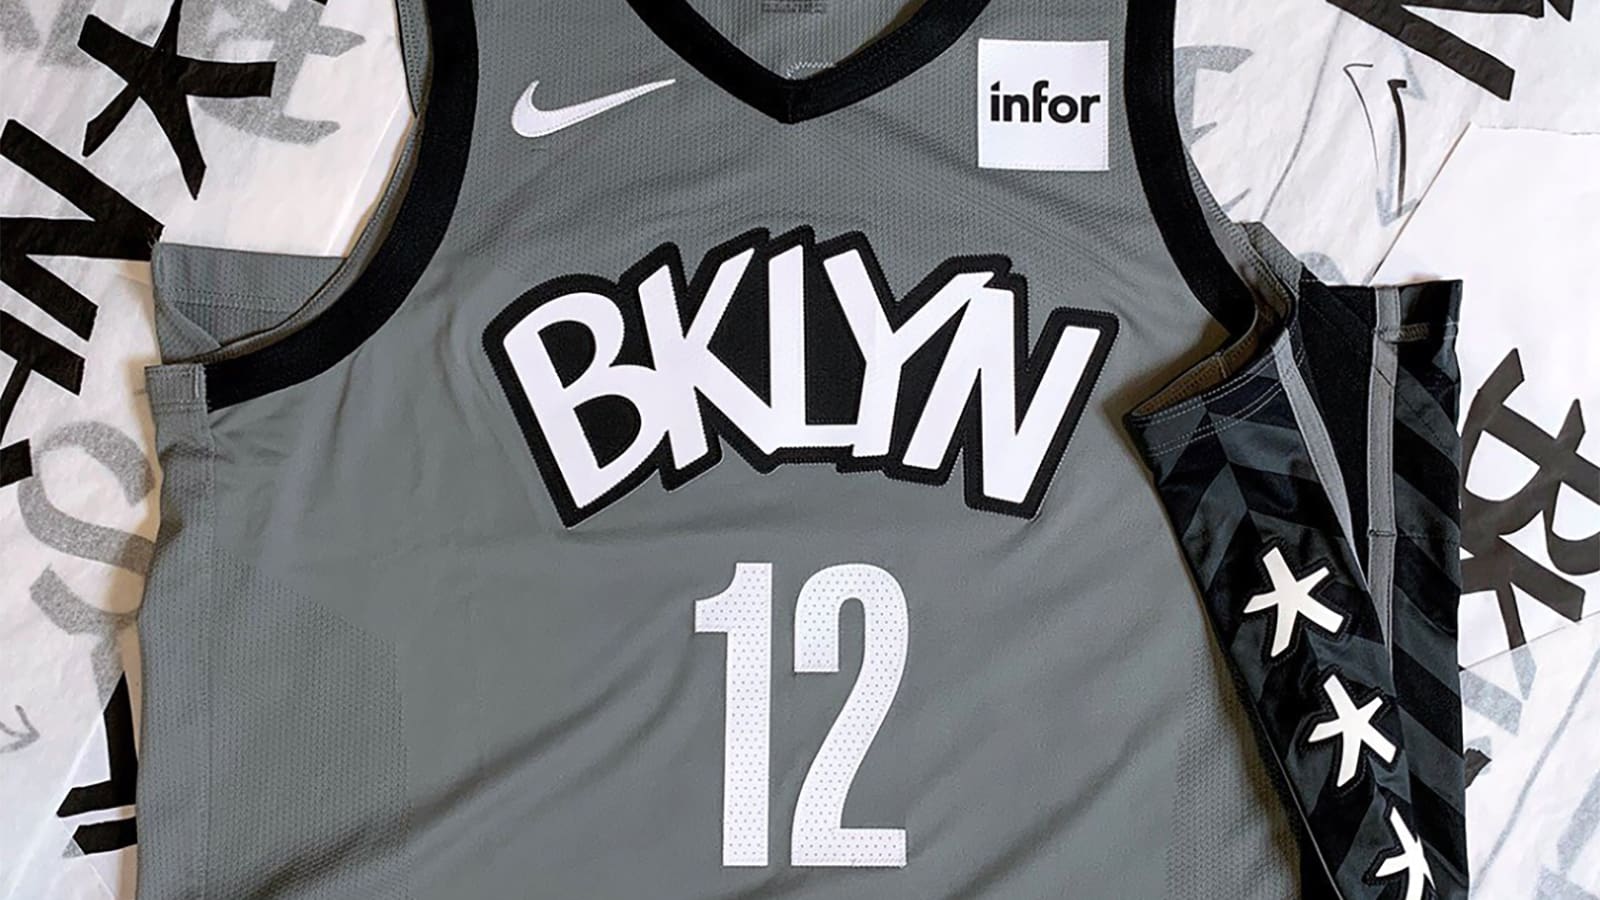 brooklyn nets coogi jersey for sale